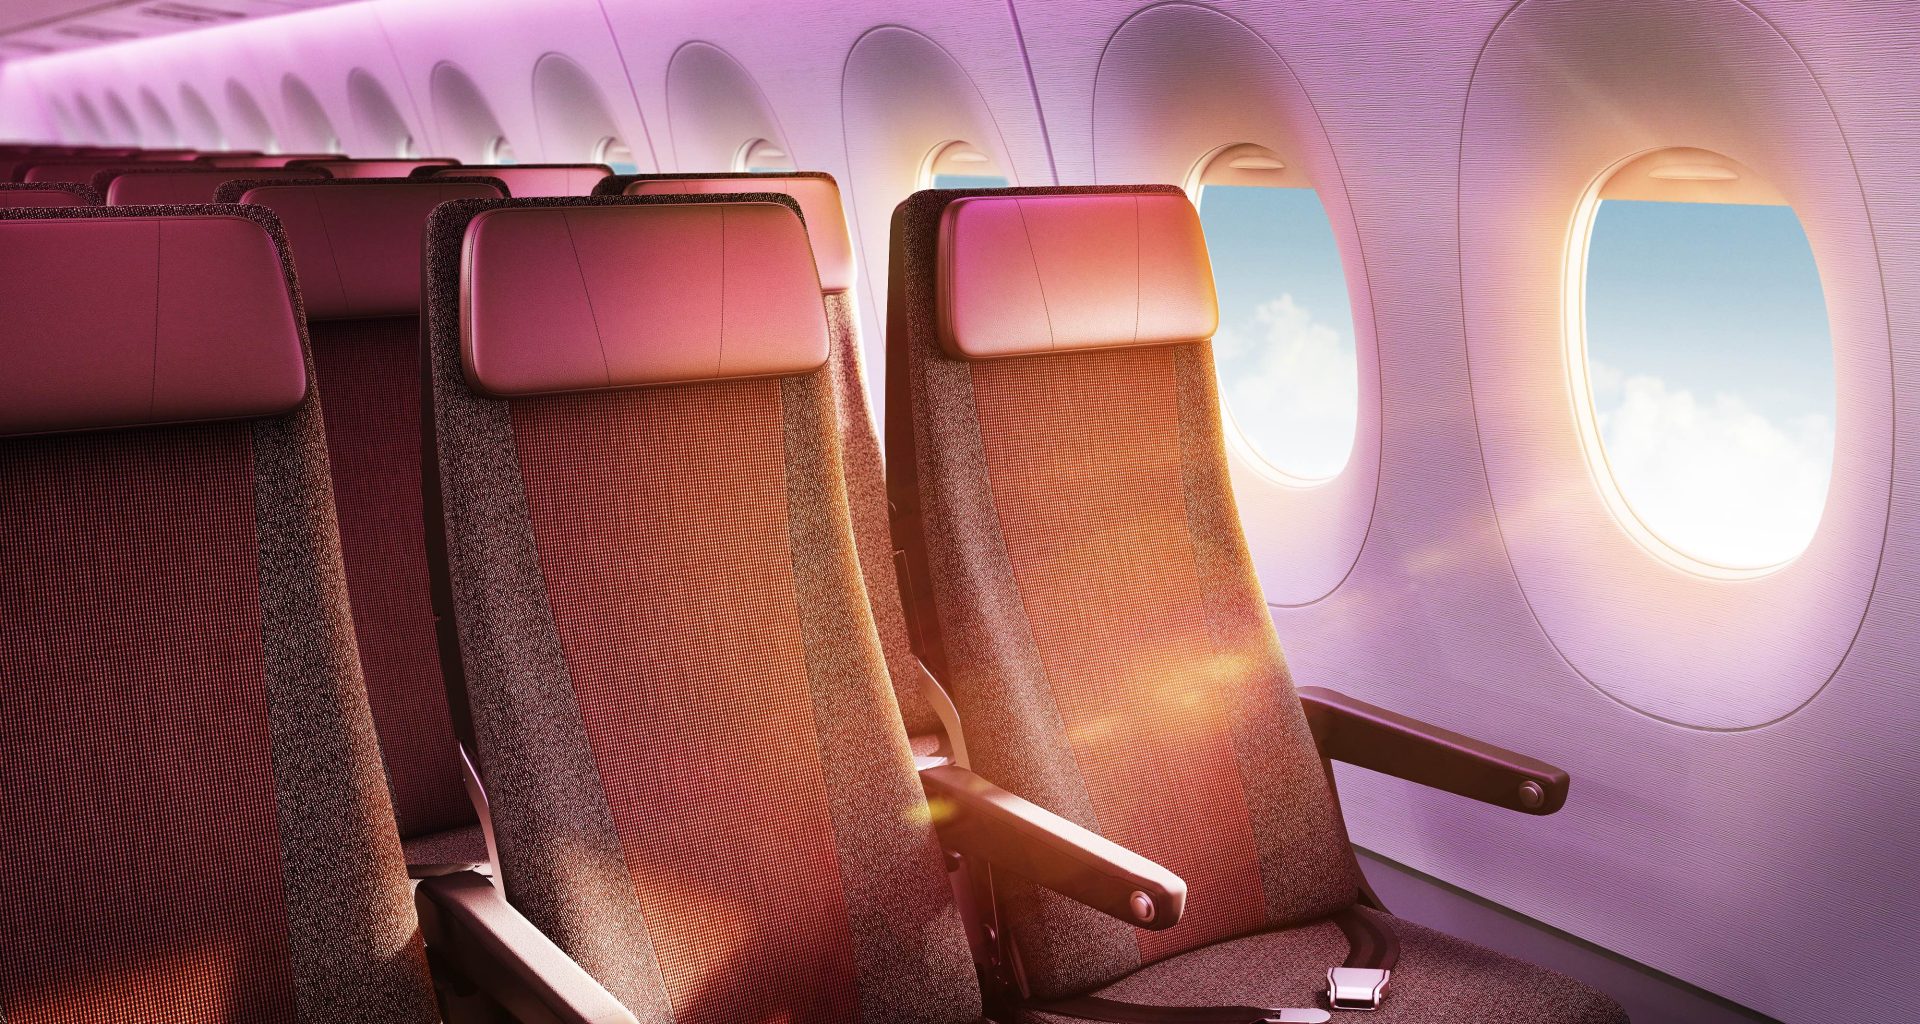 new flights launched by Virgin Atlantic